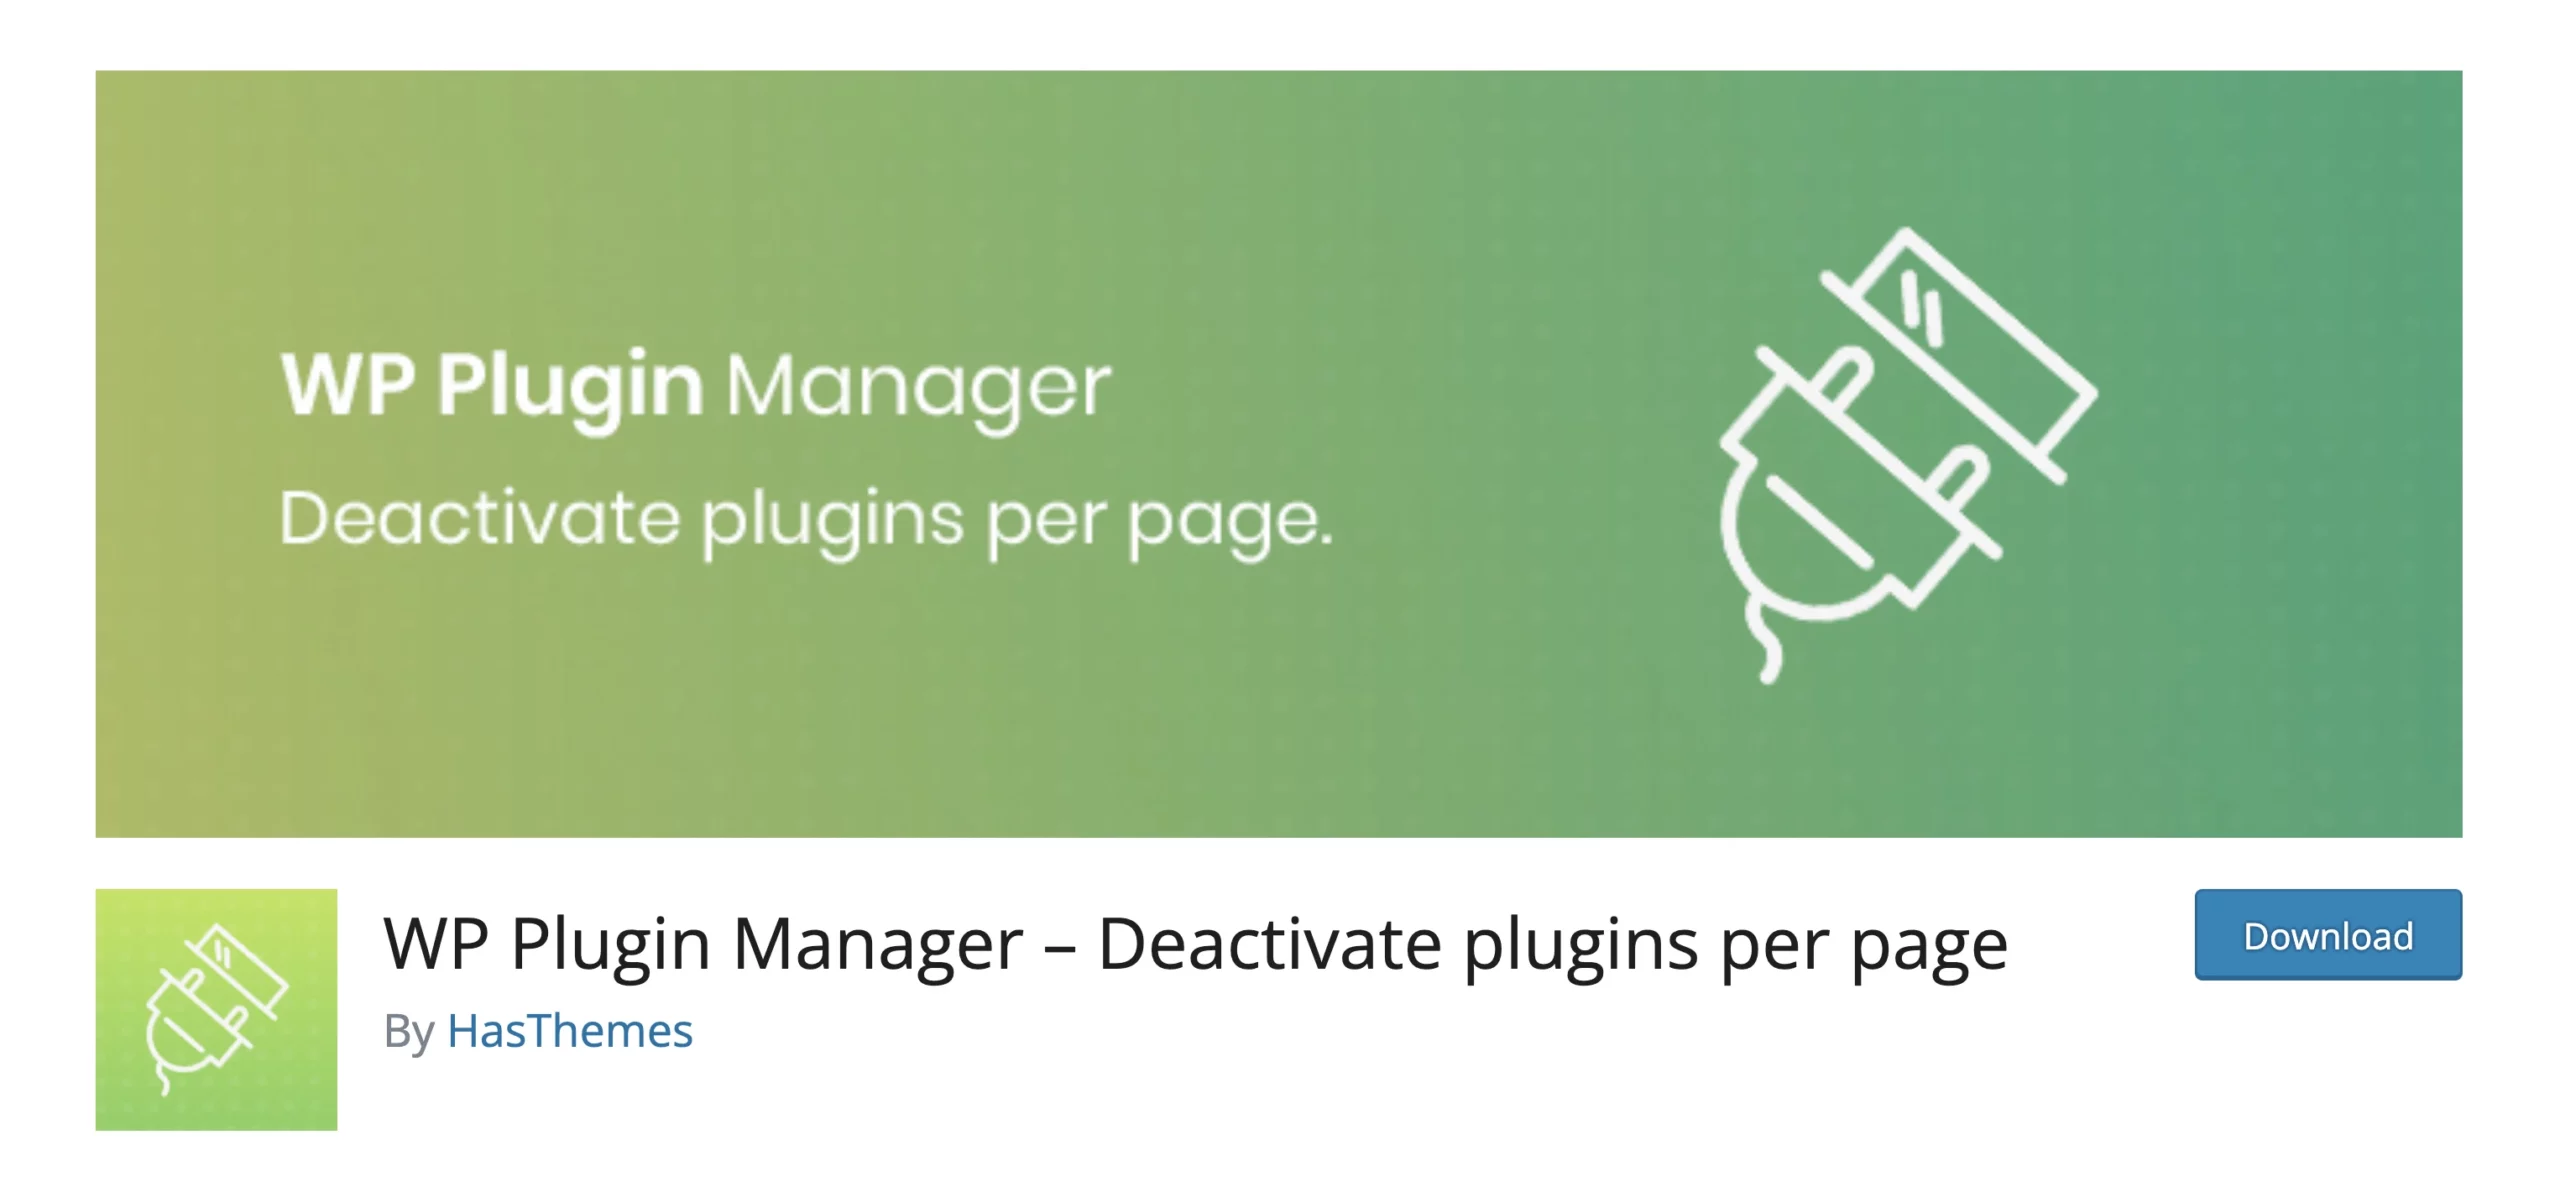 WP Plugin Manager screenshot with a button to download the software. 